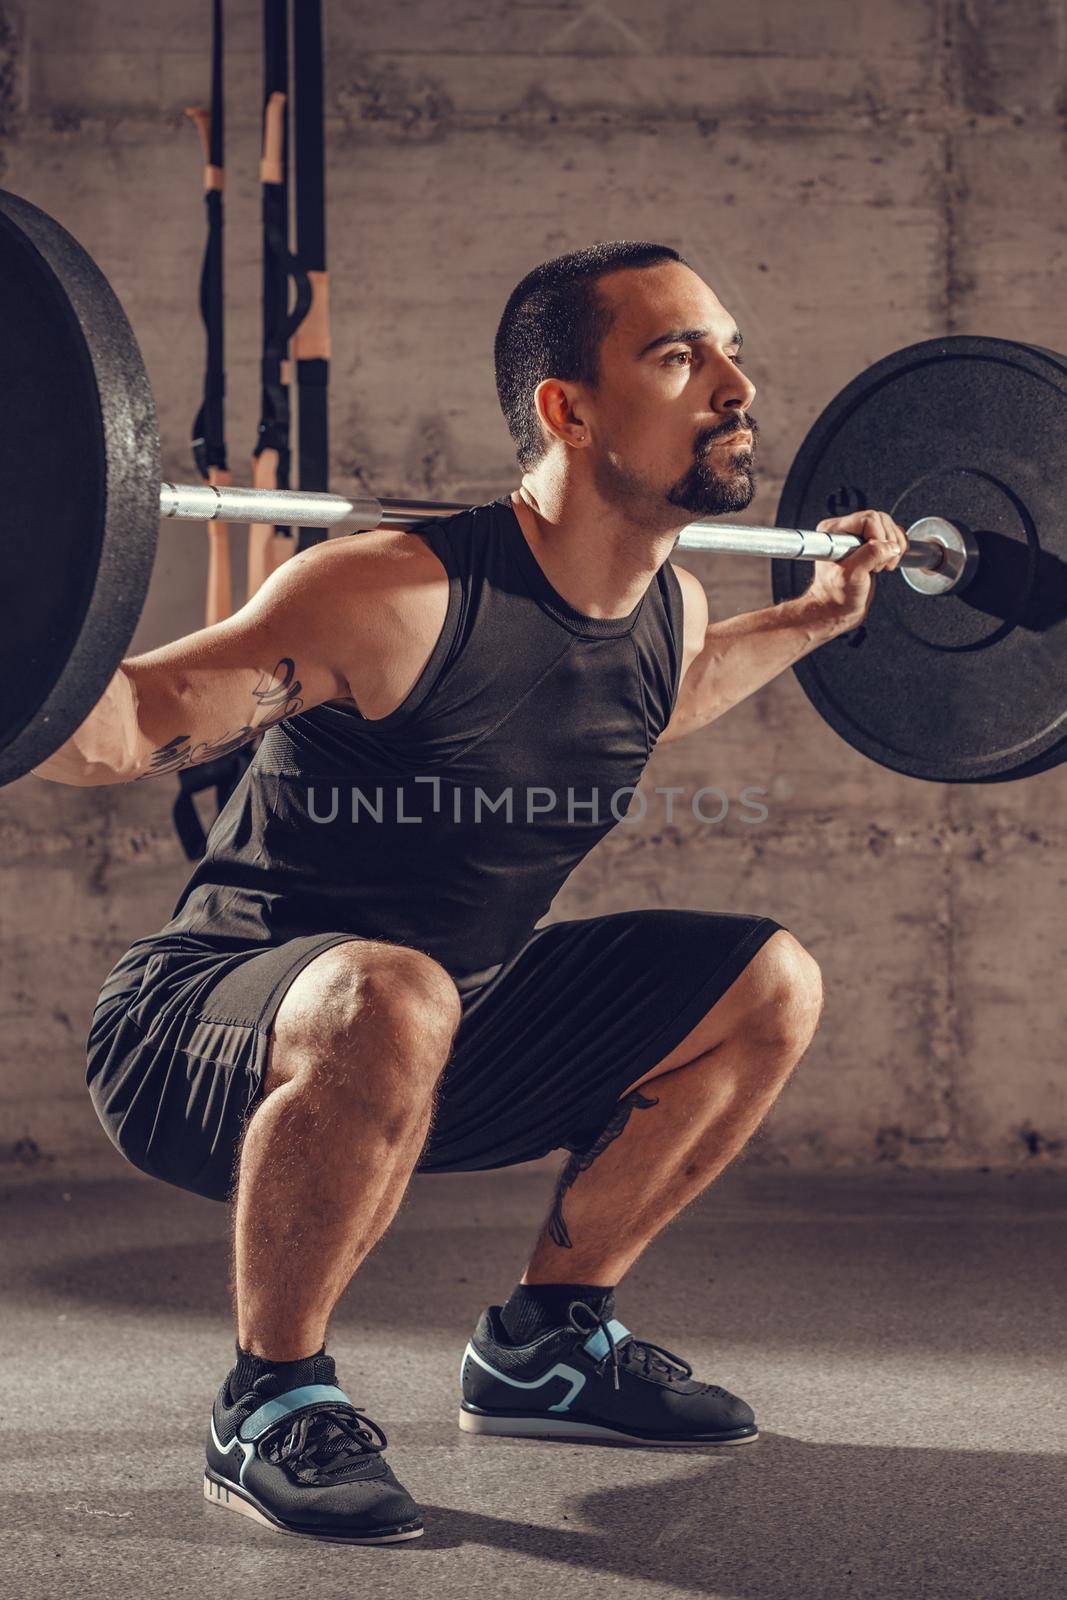 Handsome young muscular man doing squat exercise with barbell at the gym.